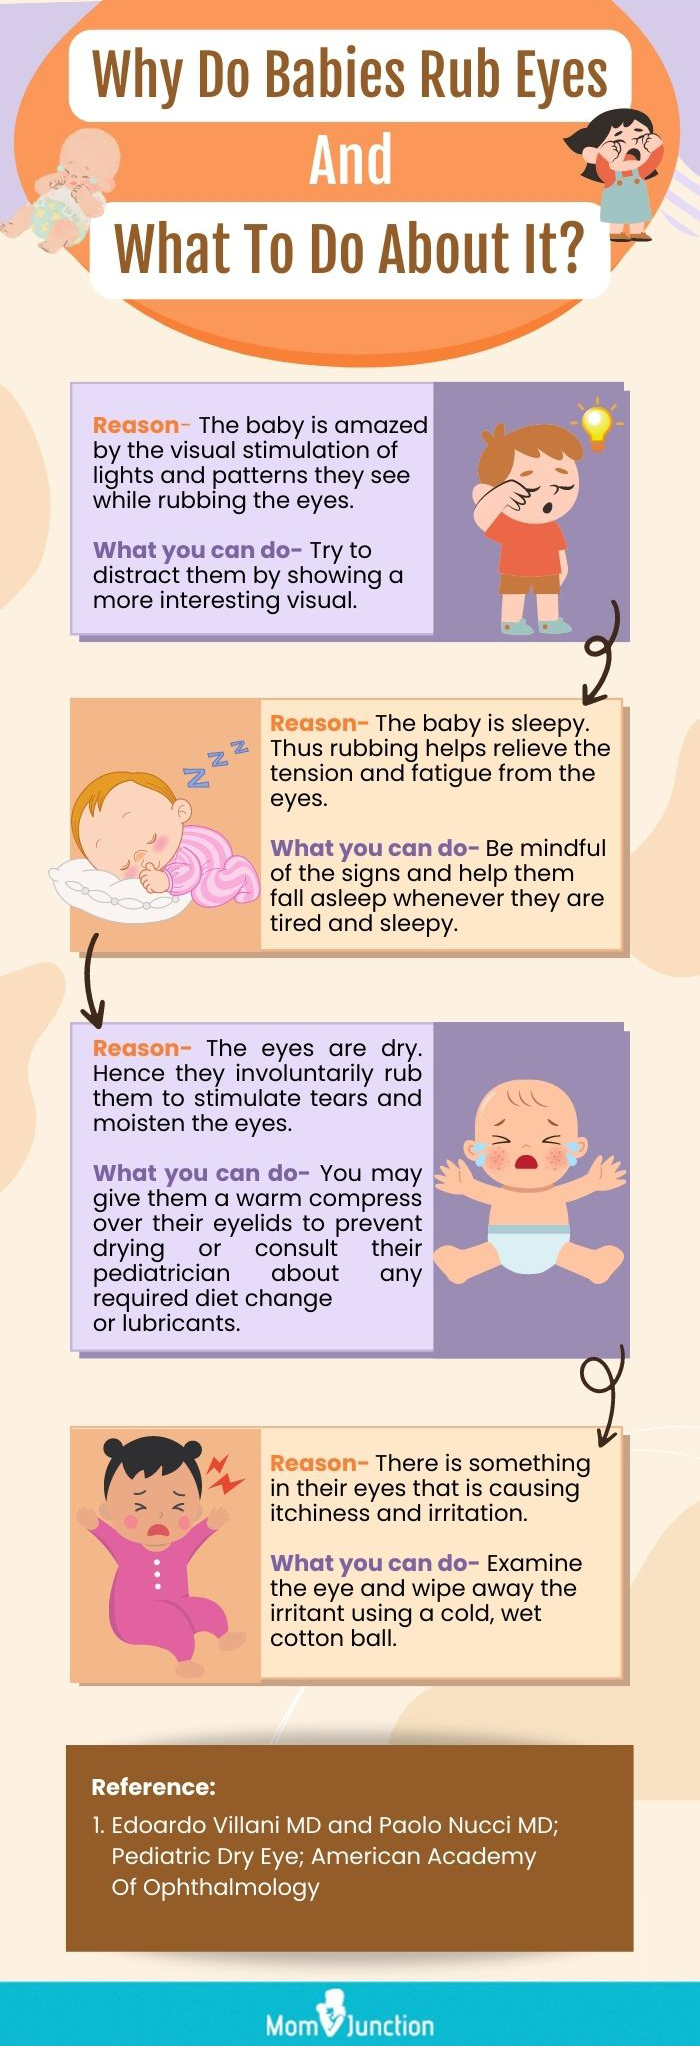 why do babies rub eyes and what to do about it (infographic)